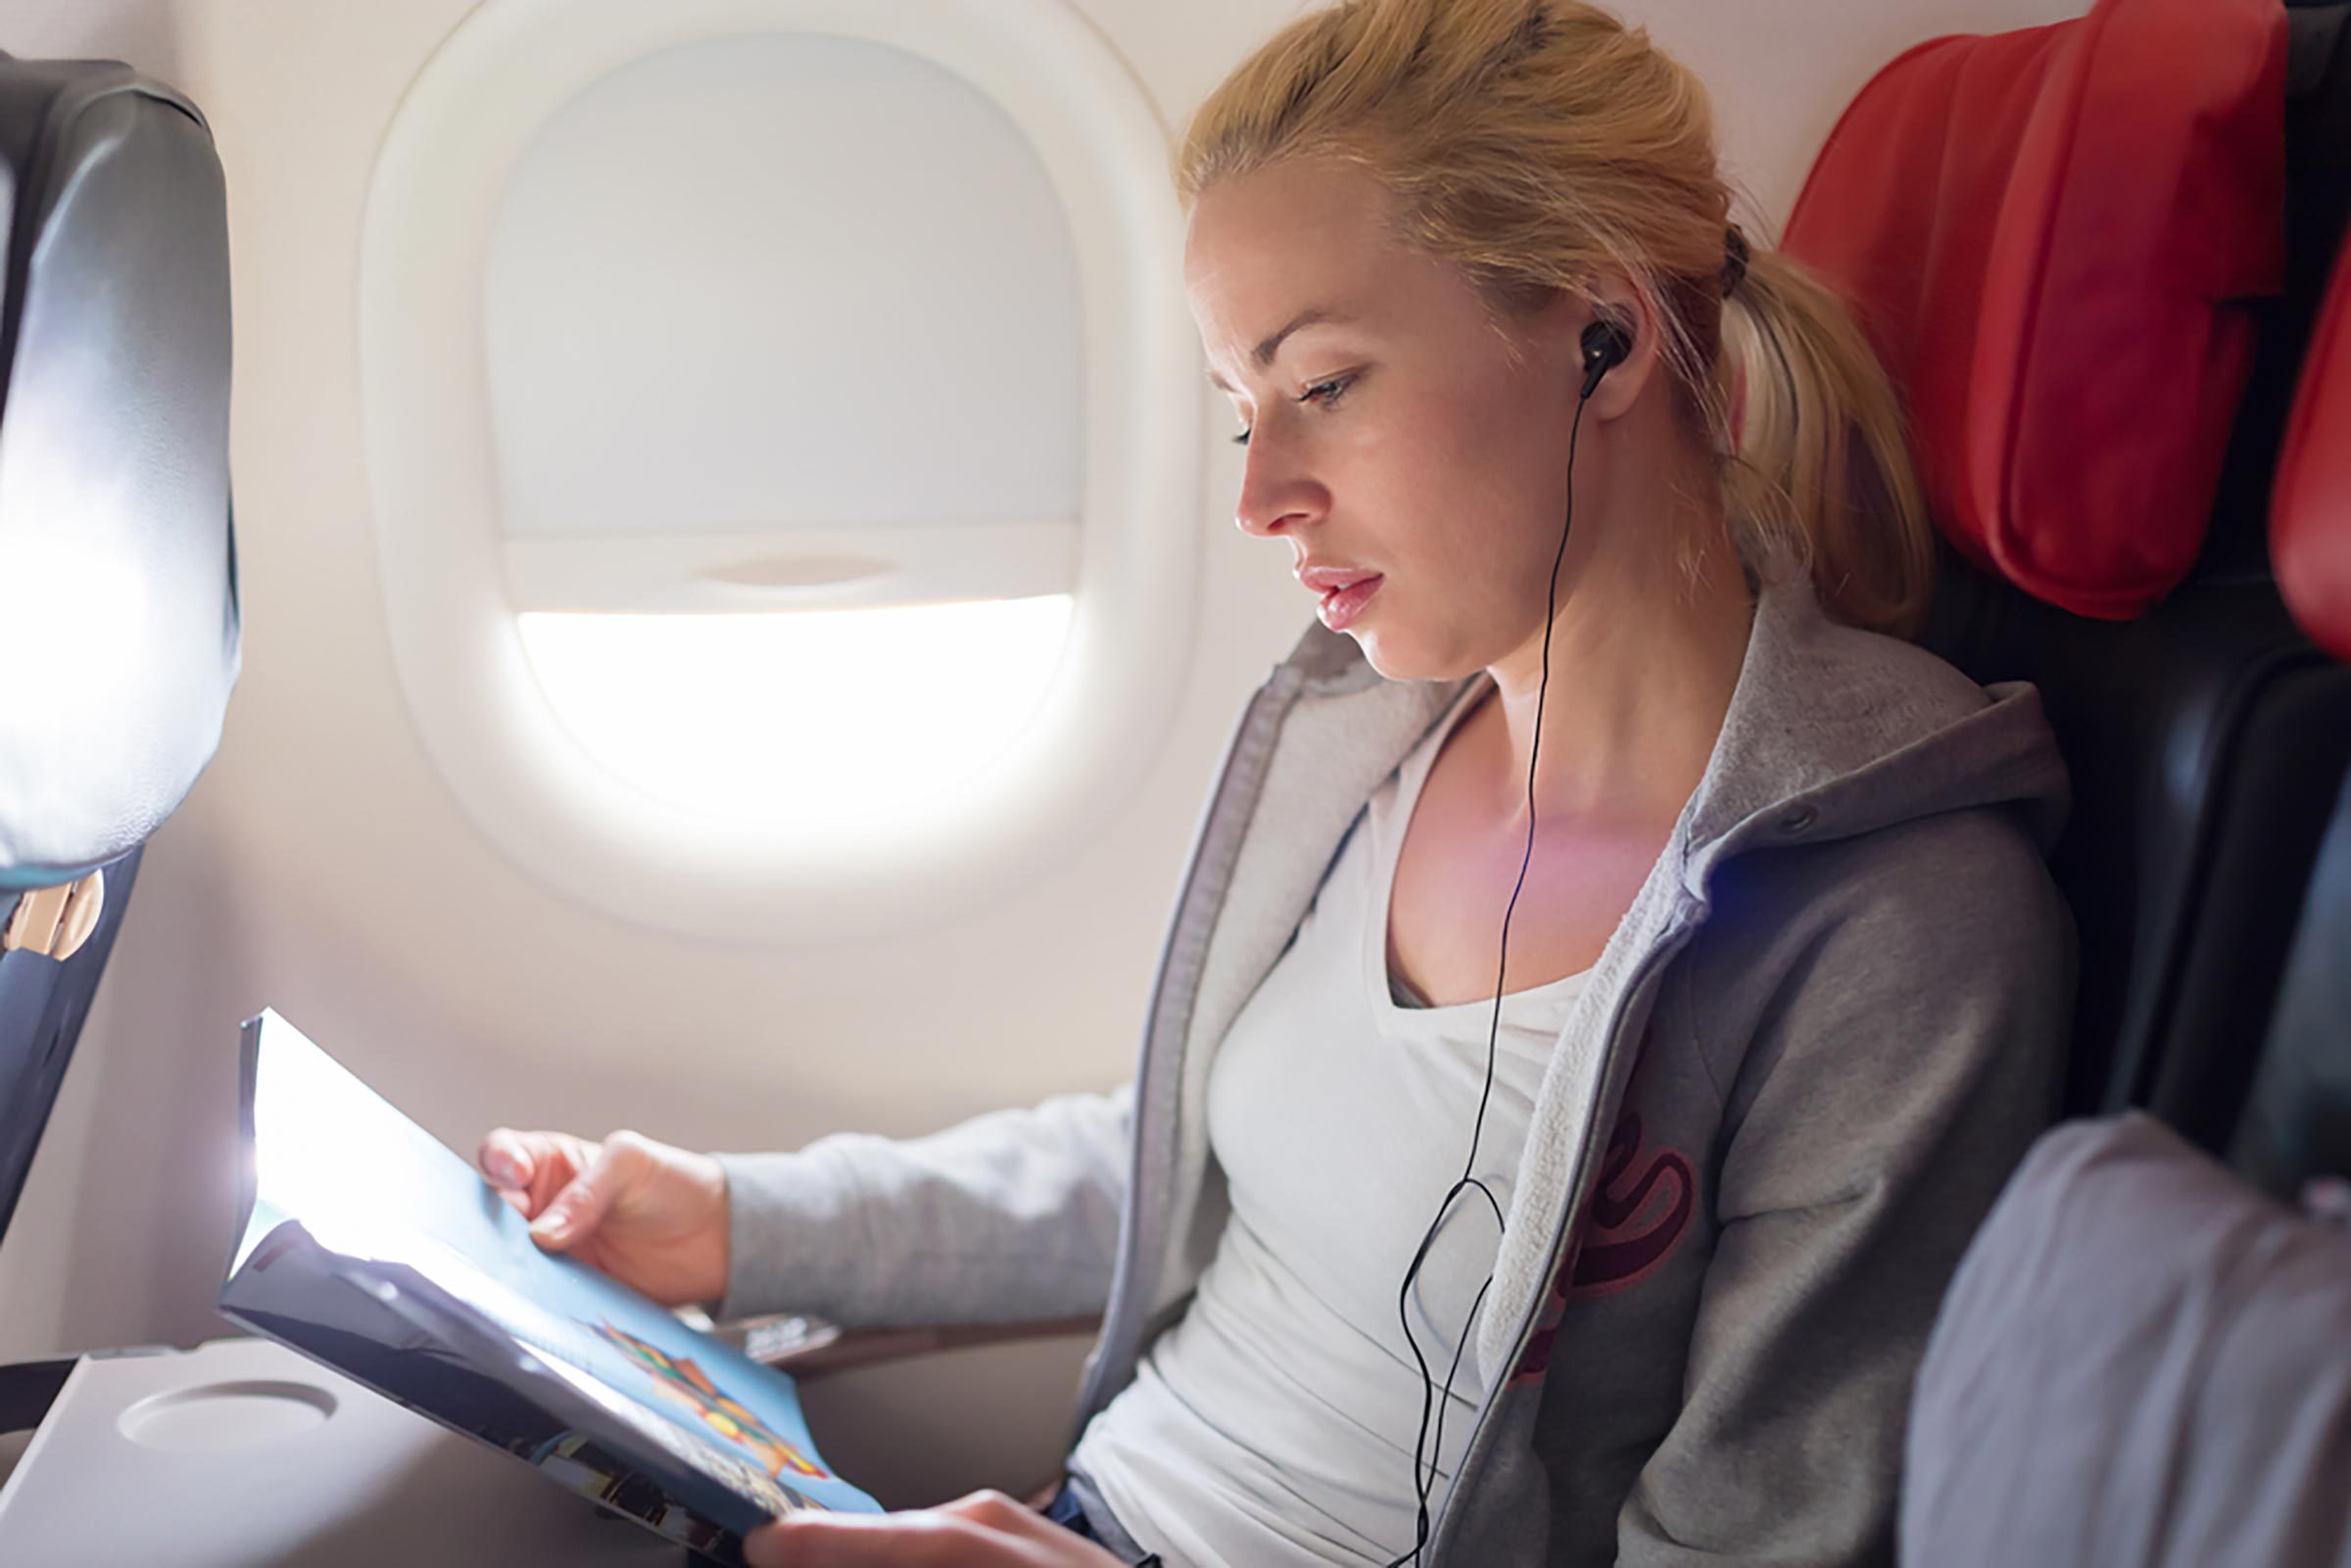 31 Products To Help You Be Comfortable On A Plane